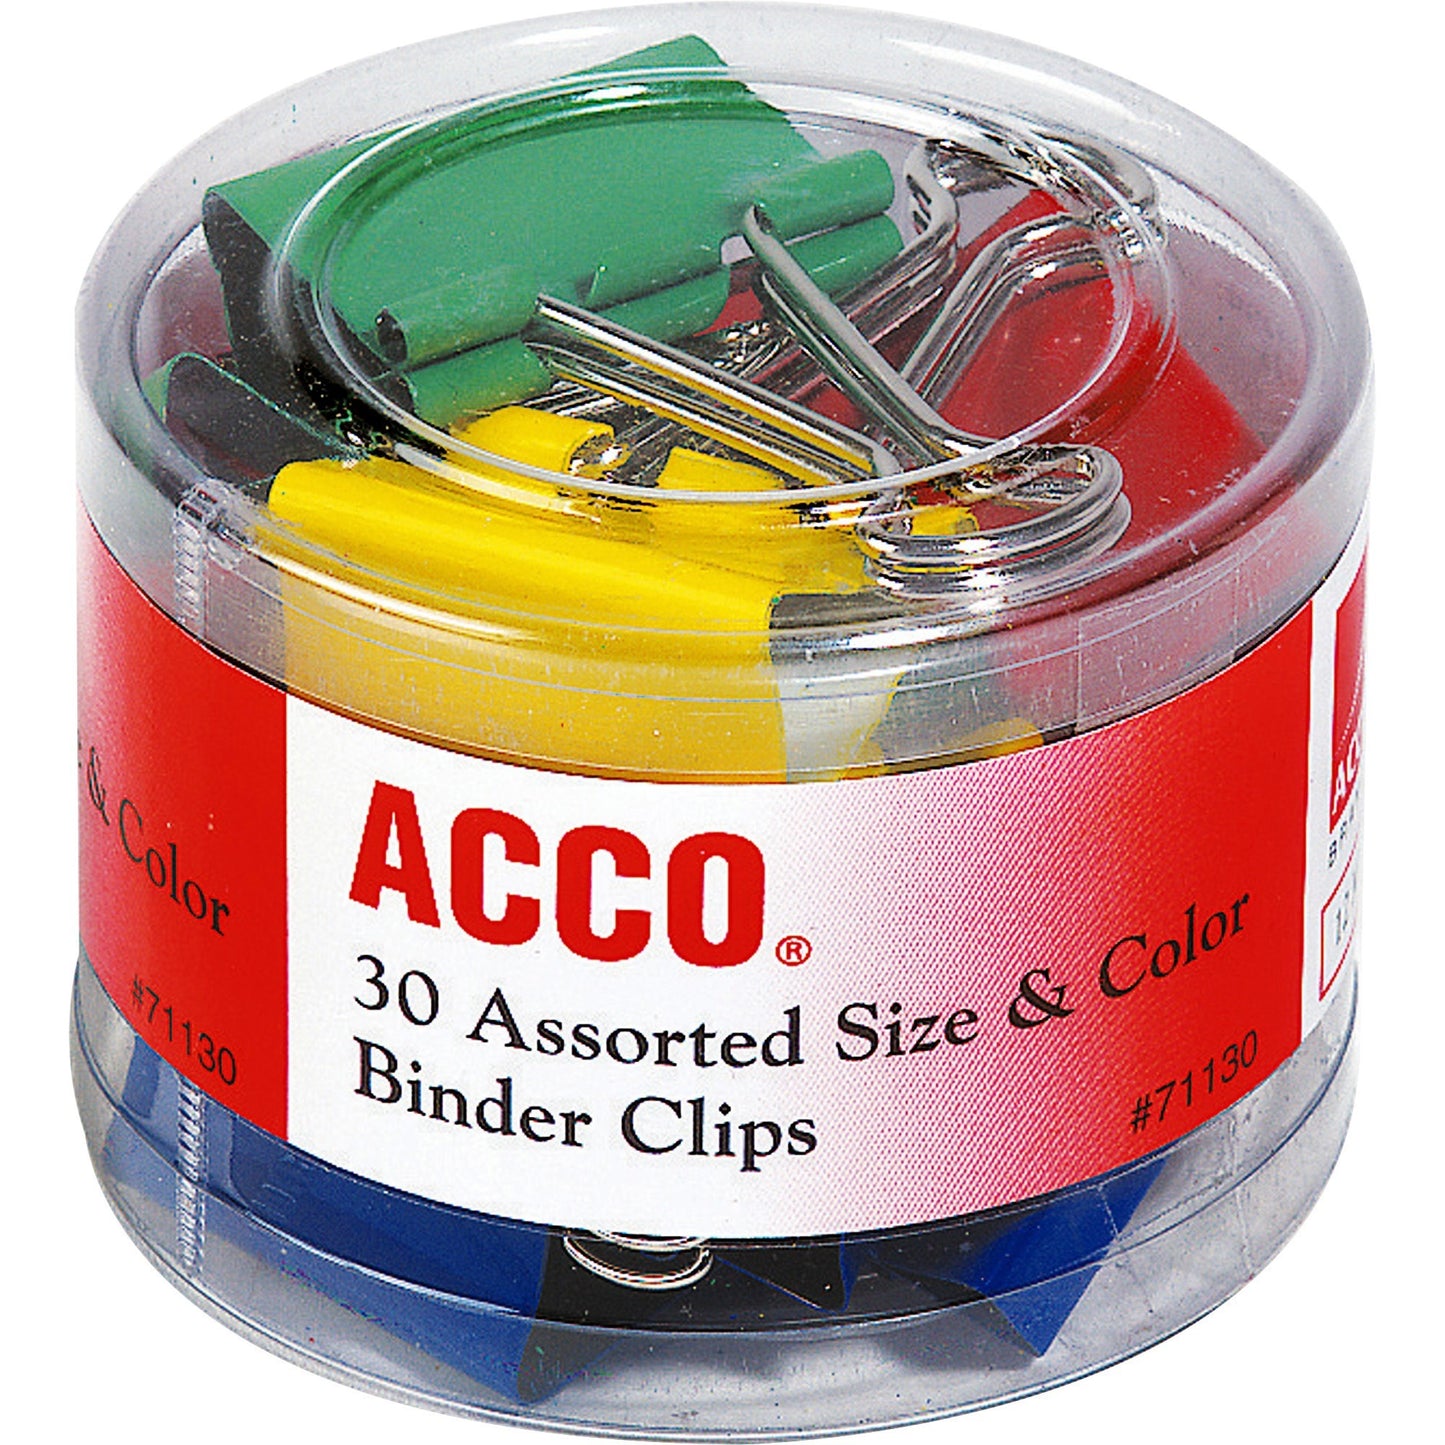 ACCO Assorted Size Binder Clips